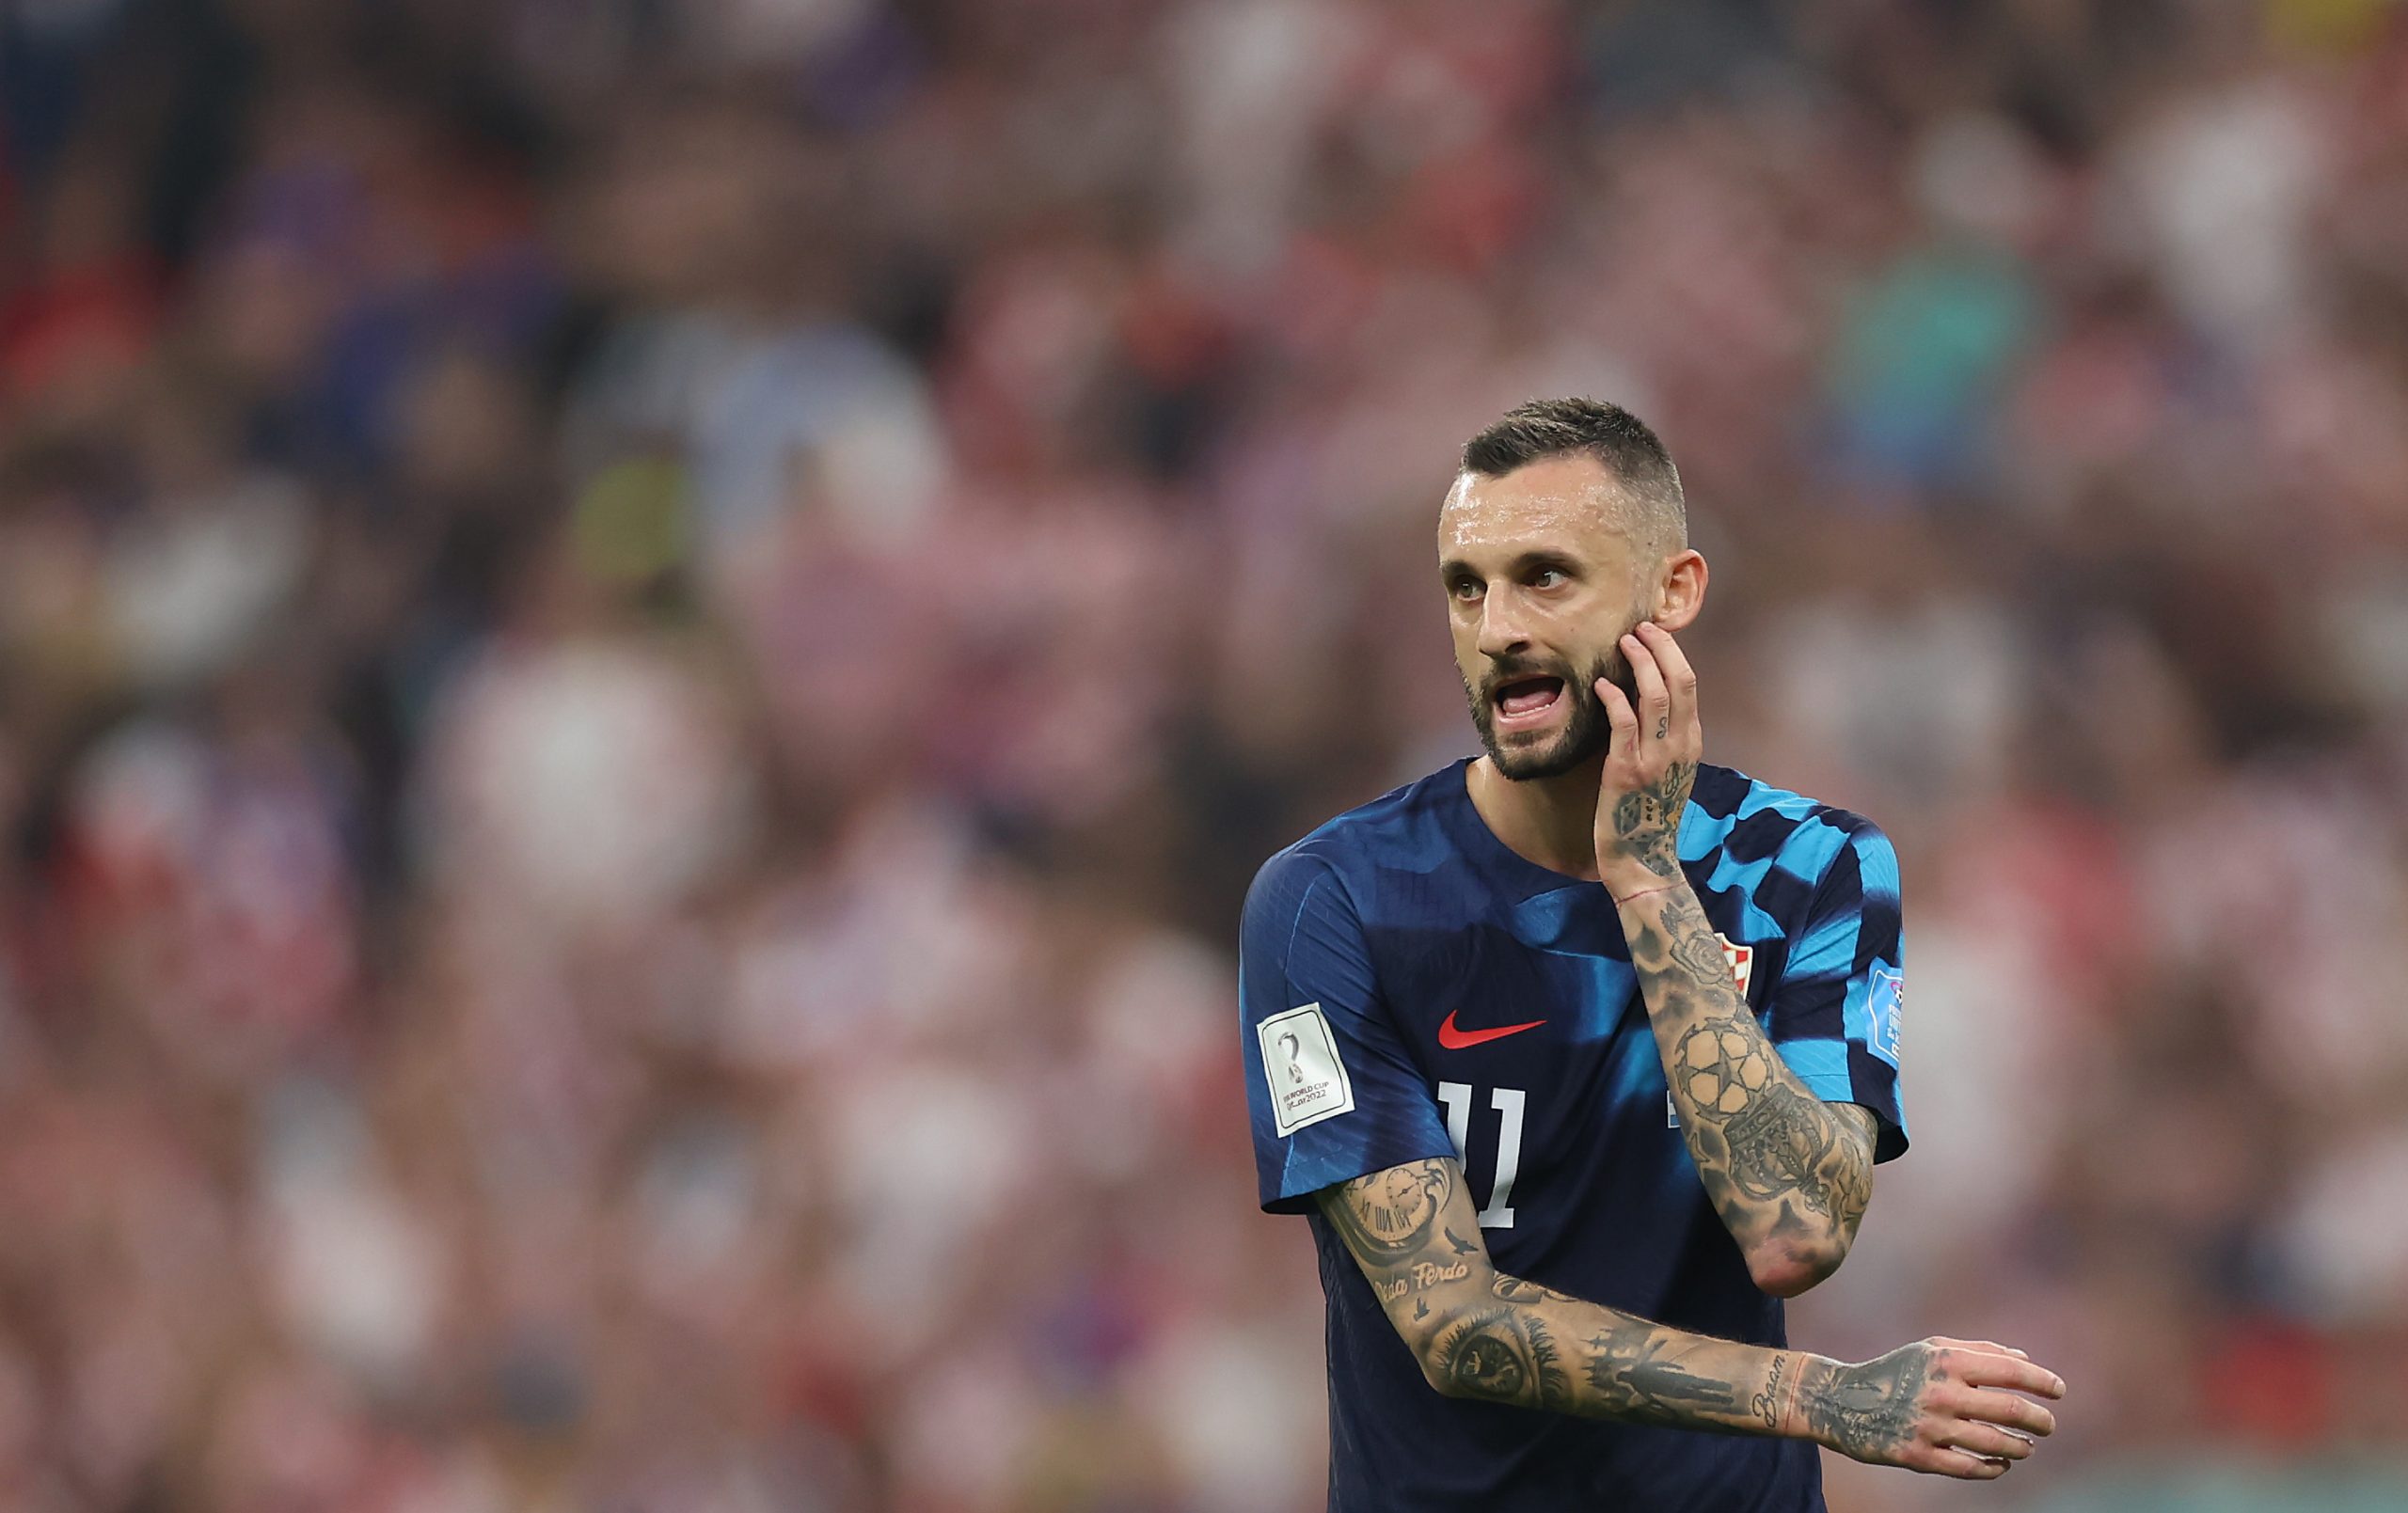 Marcelo Brozovic of Croatia finished as a runner-up at the 2018 FIFA World Cup.